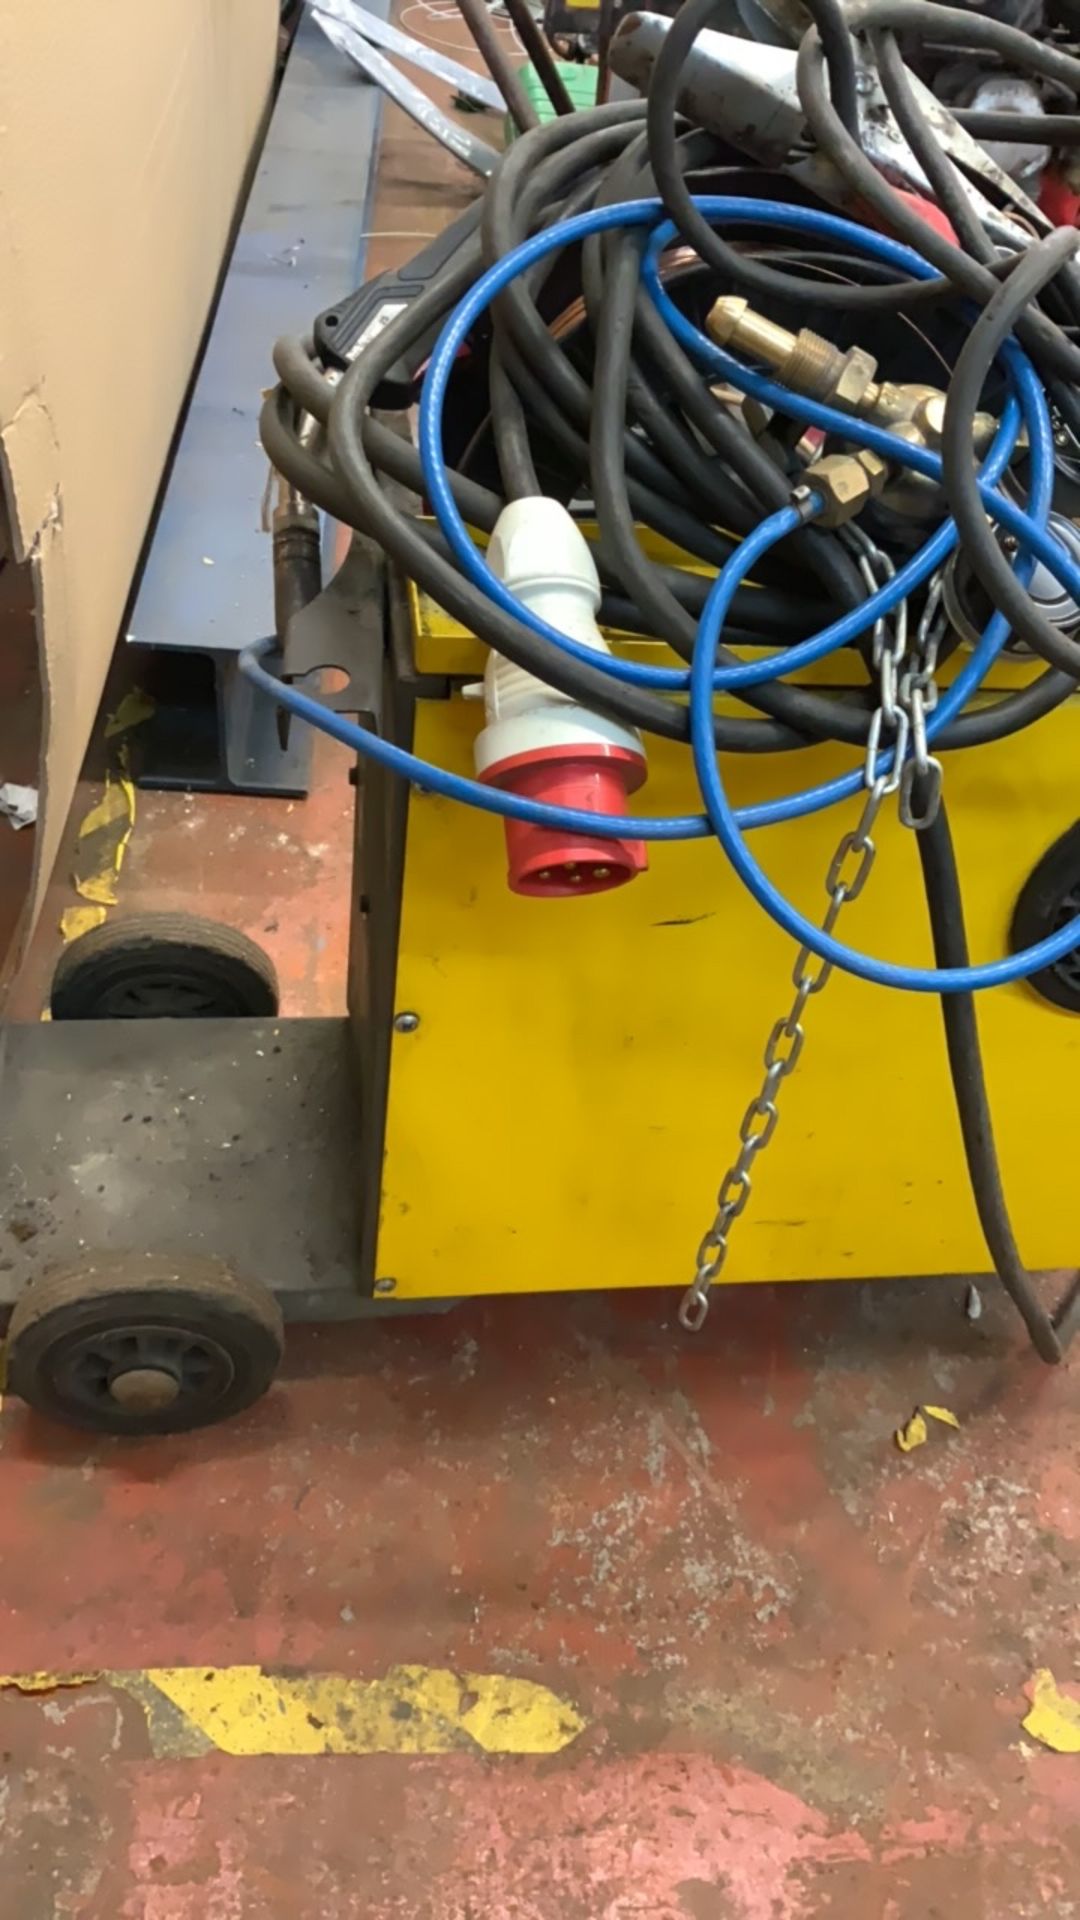 ESAB Smashweld 250, Welder, Serial No. 301-06333 with wire feed and part roll of wire - Image 14 of 14